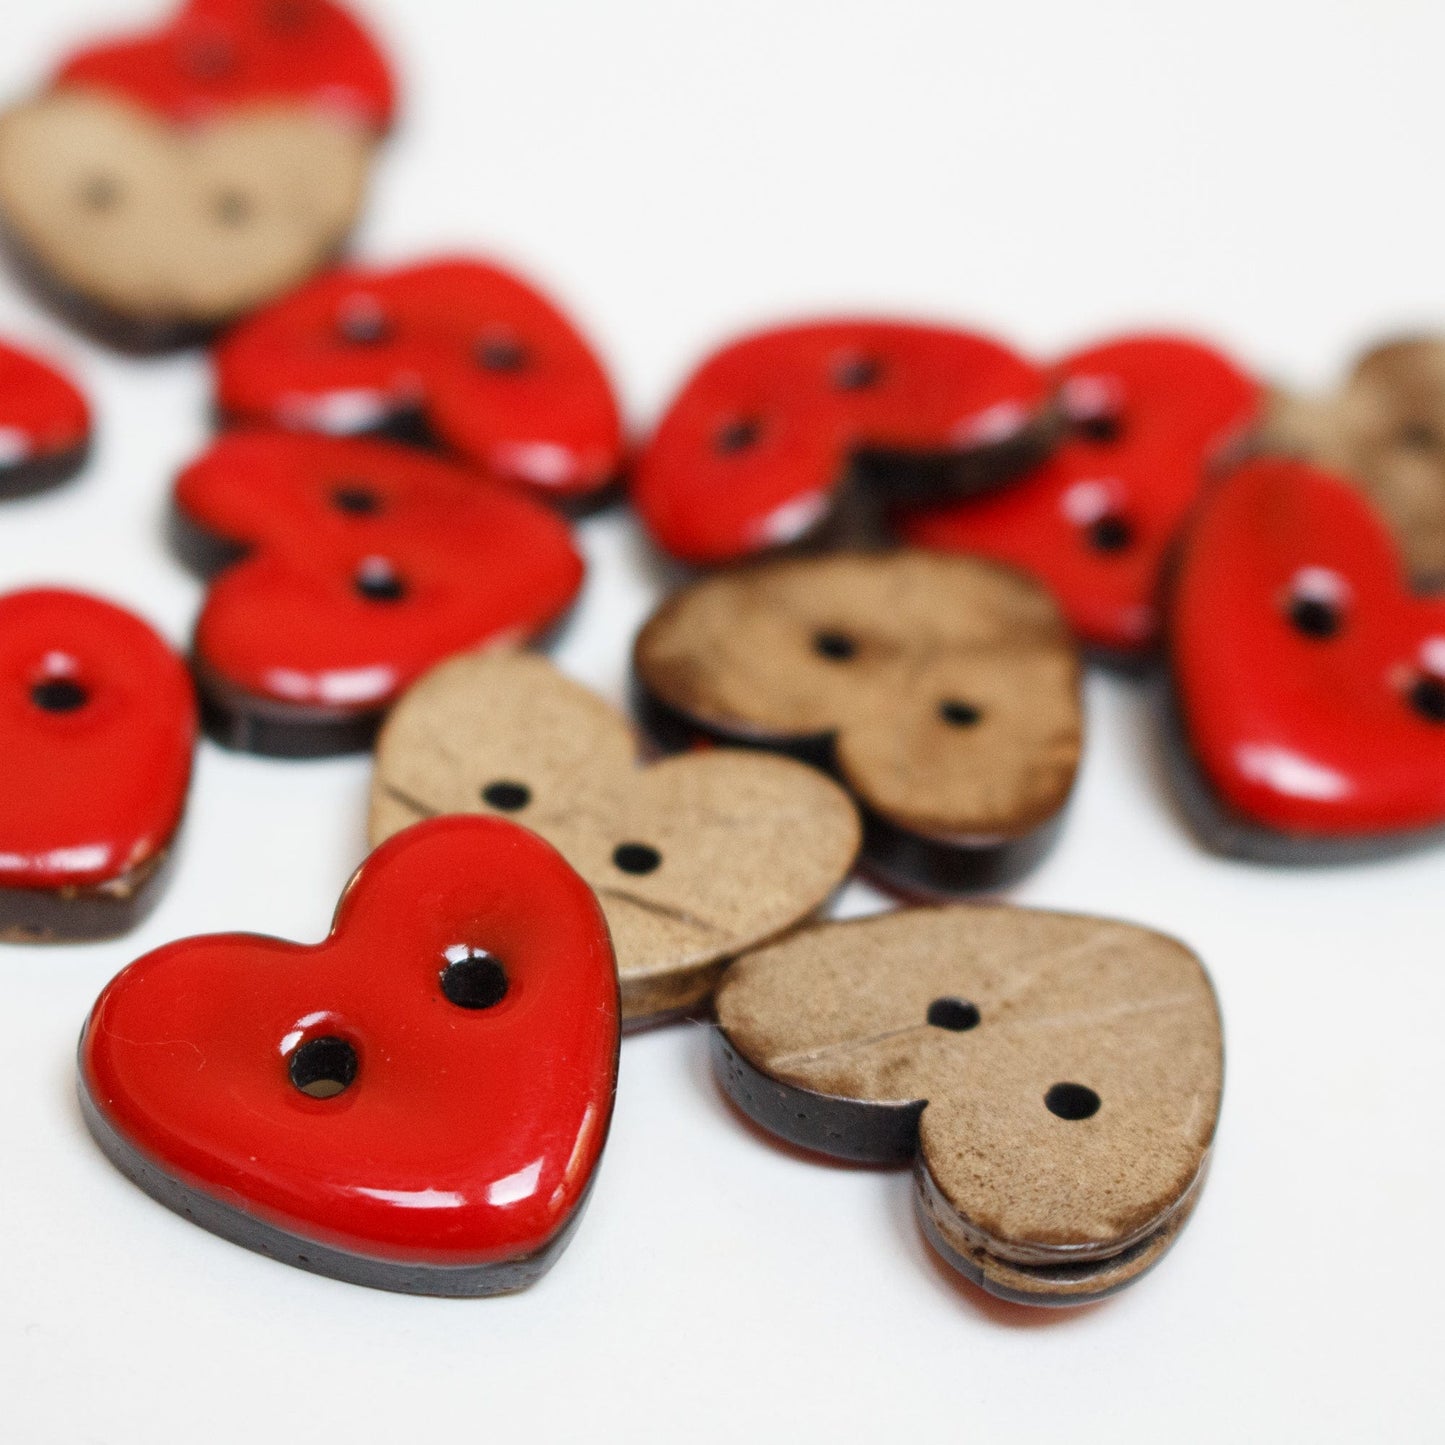 5 x Glazed Red Heart Coconut Buttons - 20mm